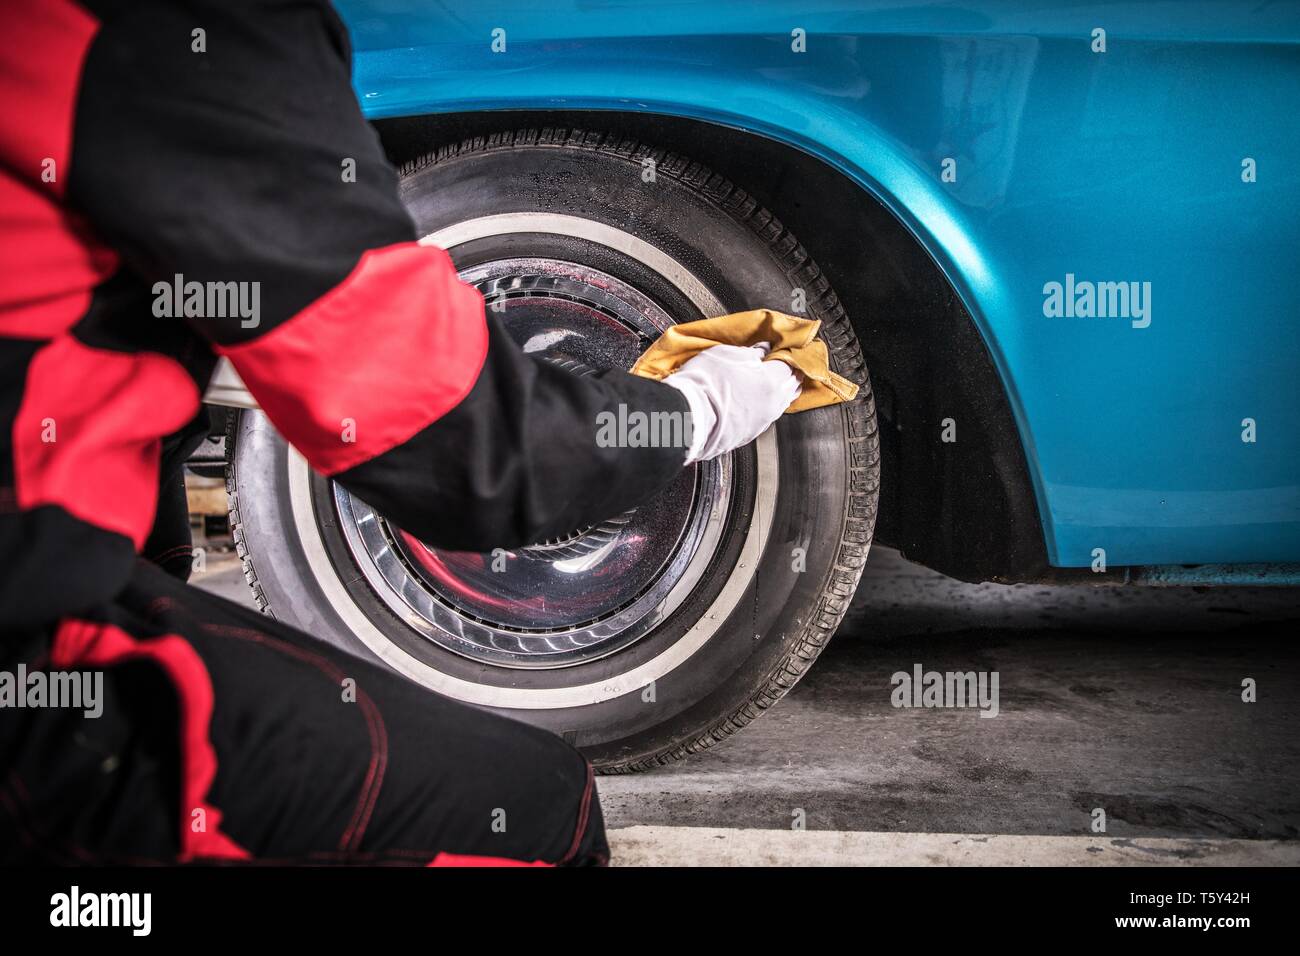 Classic Car Wheels Care. Professional Automotive Worker Cleaning Tire Using Specialized Spray. Stock Photo